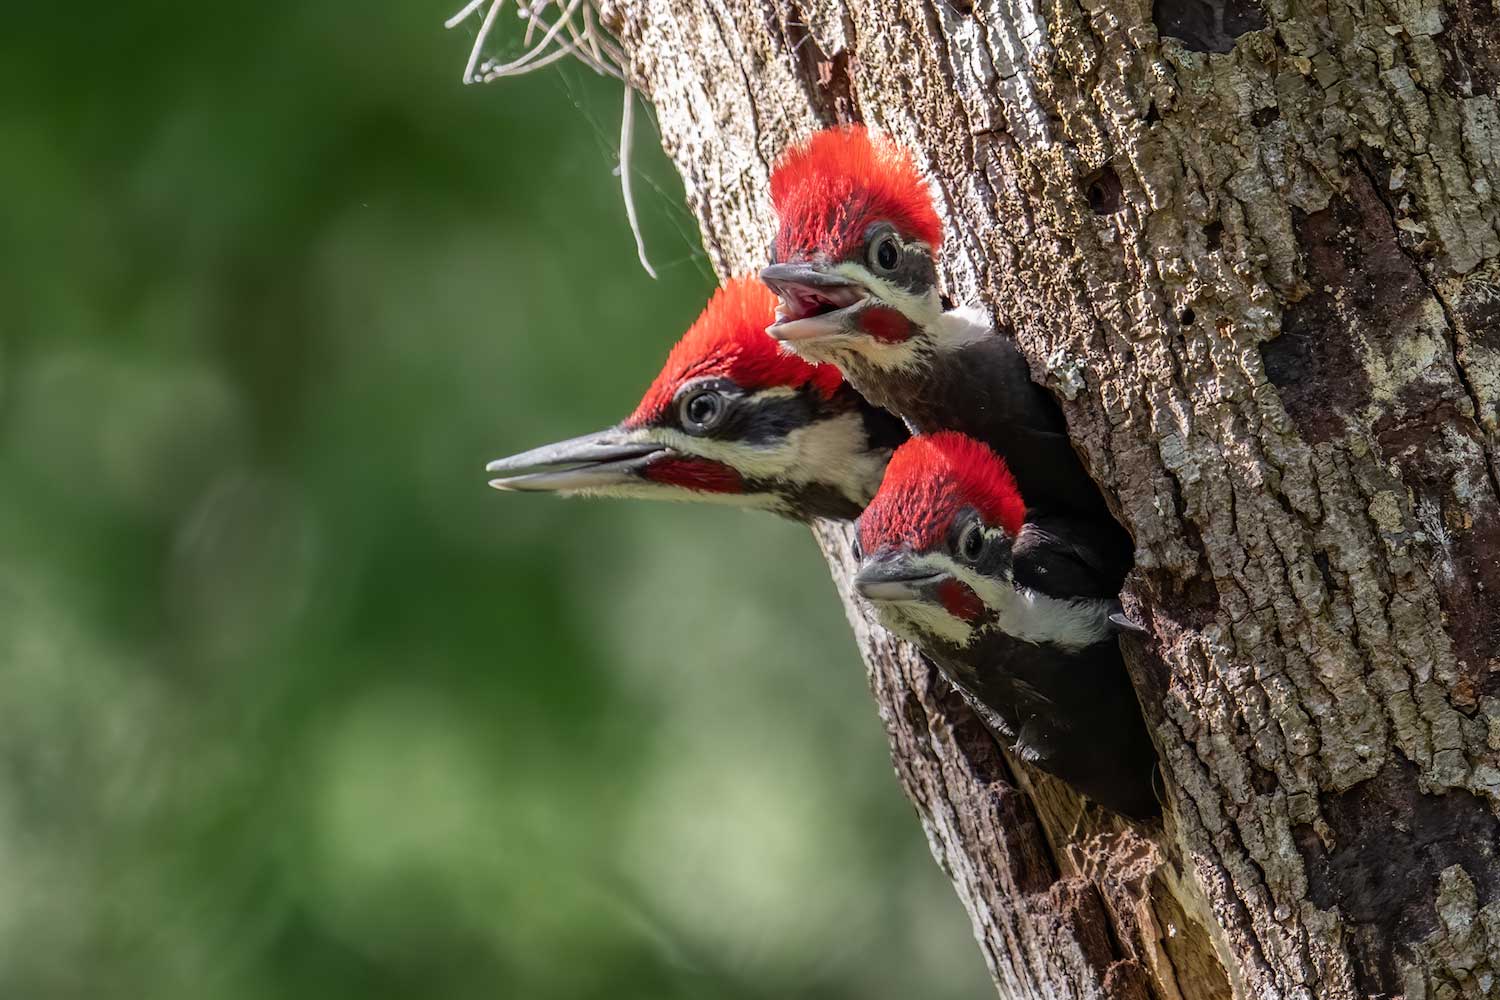 Three young pileated woodpeckers sticking their heads out of a tree cavity.